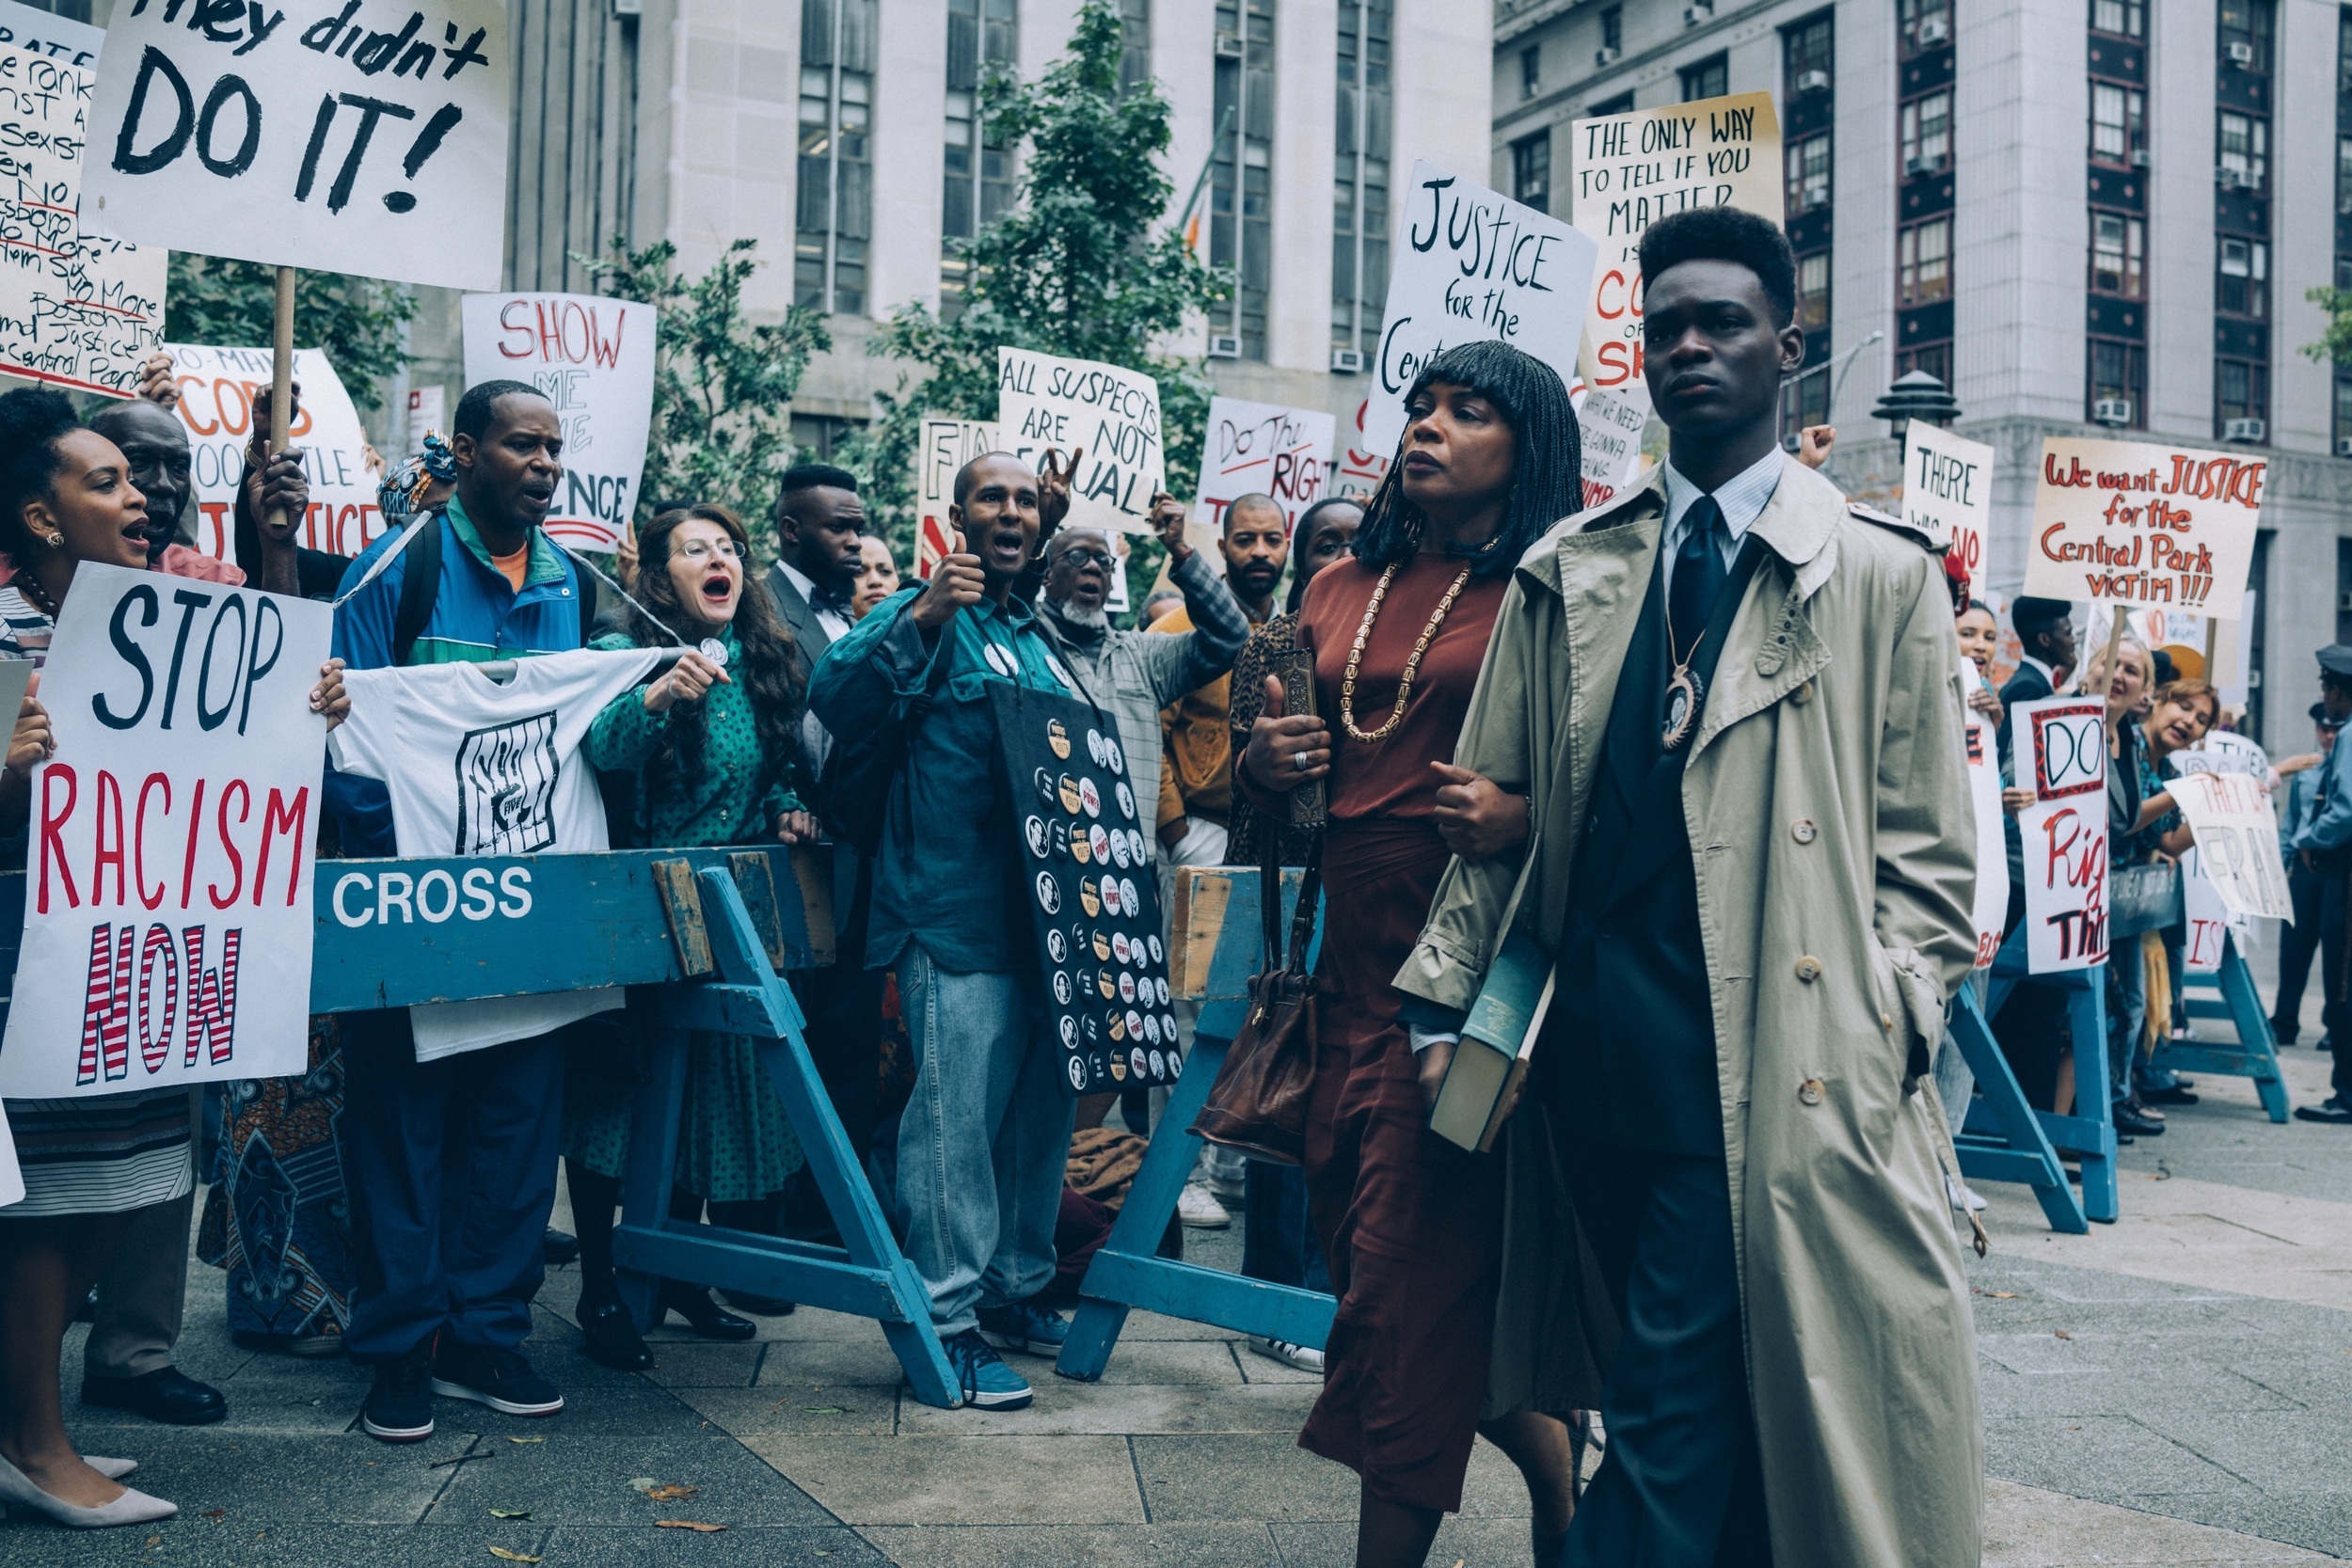 <p>Director Ava DuVernay's acclaimed series "When They See Us" is equal parts gripping and devastating. Based on the true story of five men who were wrongfully accused of sexual assault in New York City in 1989, it's an unflinching look at the injustices that are often perpetrated in the American criminal justice system. Stream on Netflix. </p><p>You may also like: <a href='https://www.yardbarker.com/entertainment/articles/actors_who_became_unrecognizable_in_roles_040424/s1__39115025'>Actors who became unrecognizable in roles</a></p>